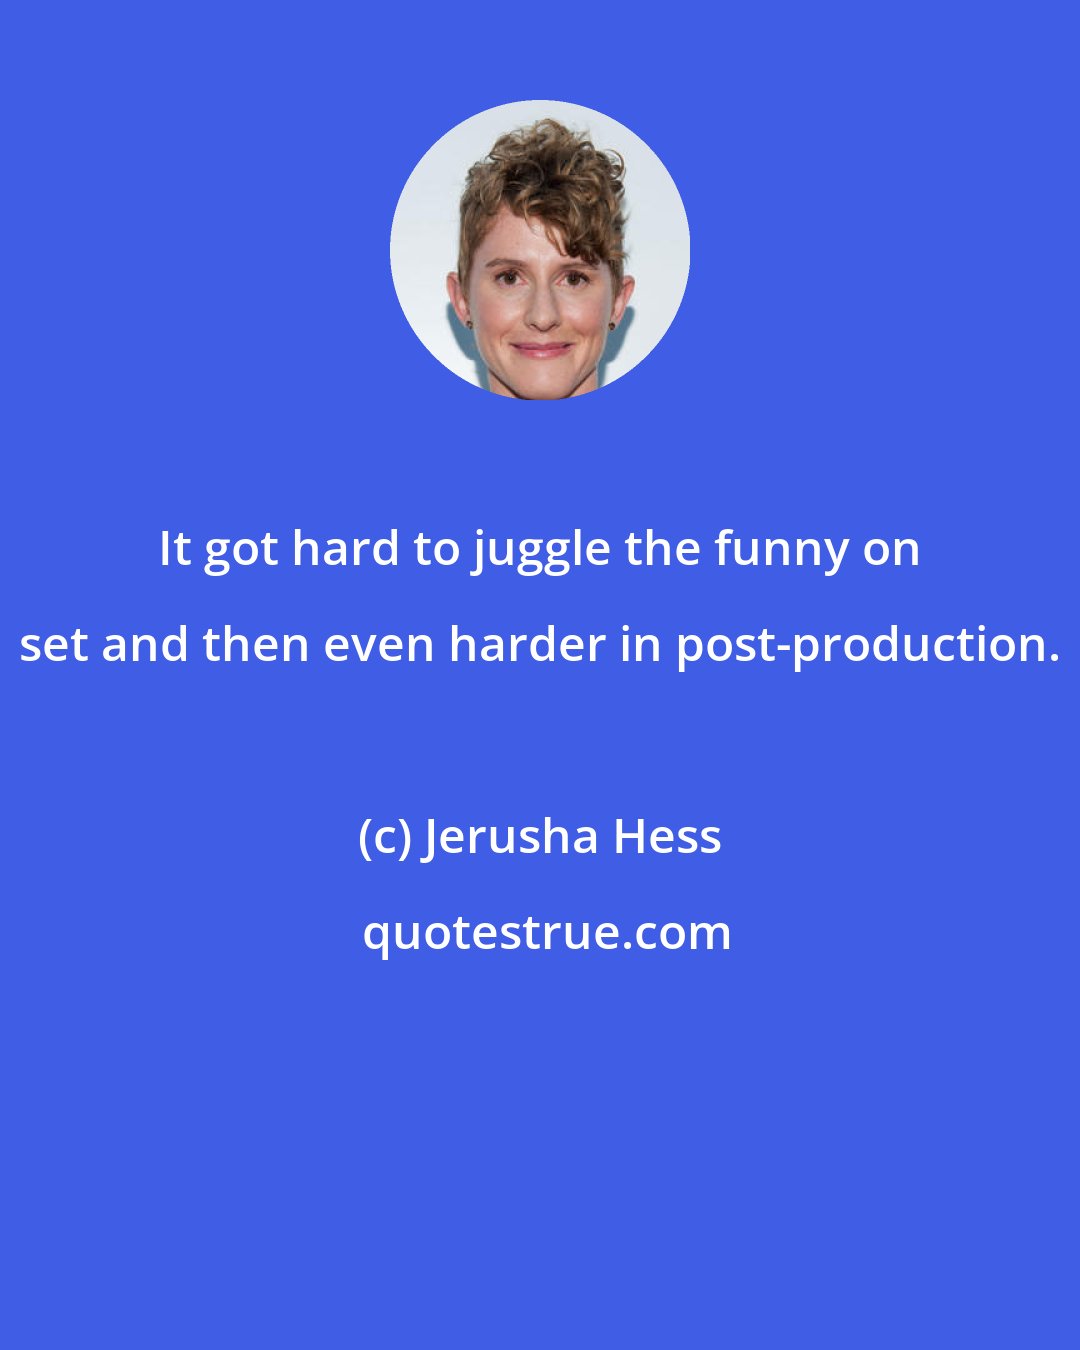 Jerusha Hess: It got hard to juggle the funny on set and then even harder in post-production.